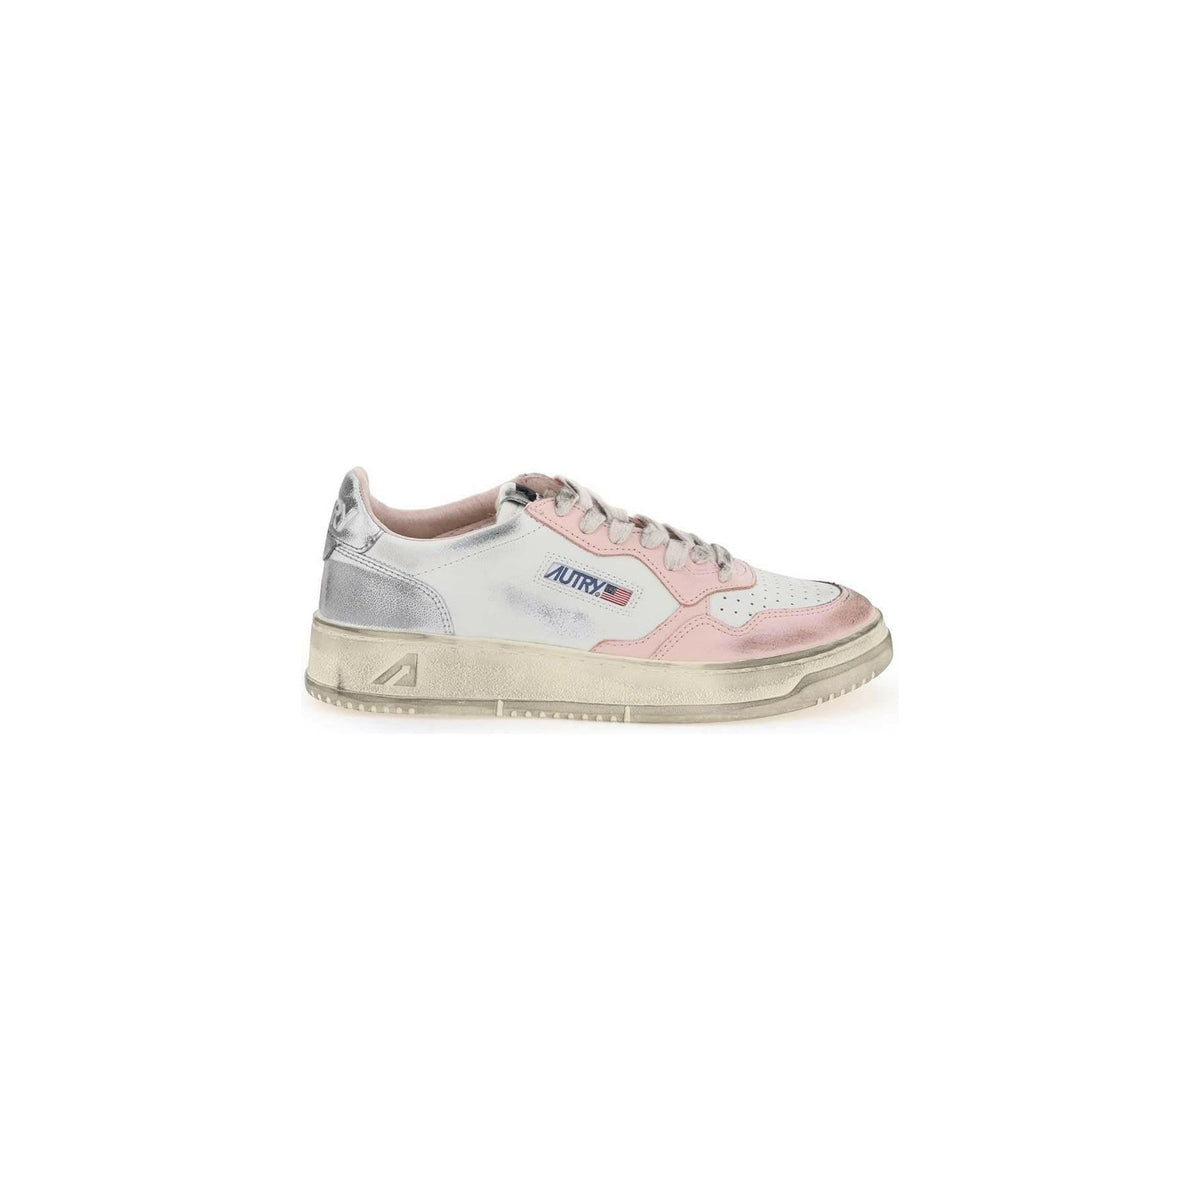 AUTRY - White Pink and Silver Medalist Low Super Vintage Sneakers - JOHN JULIA